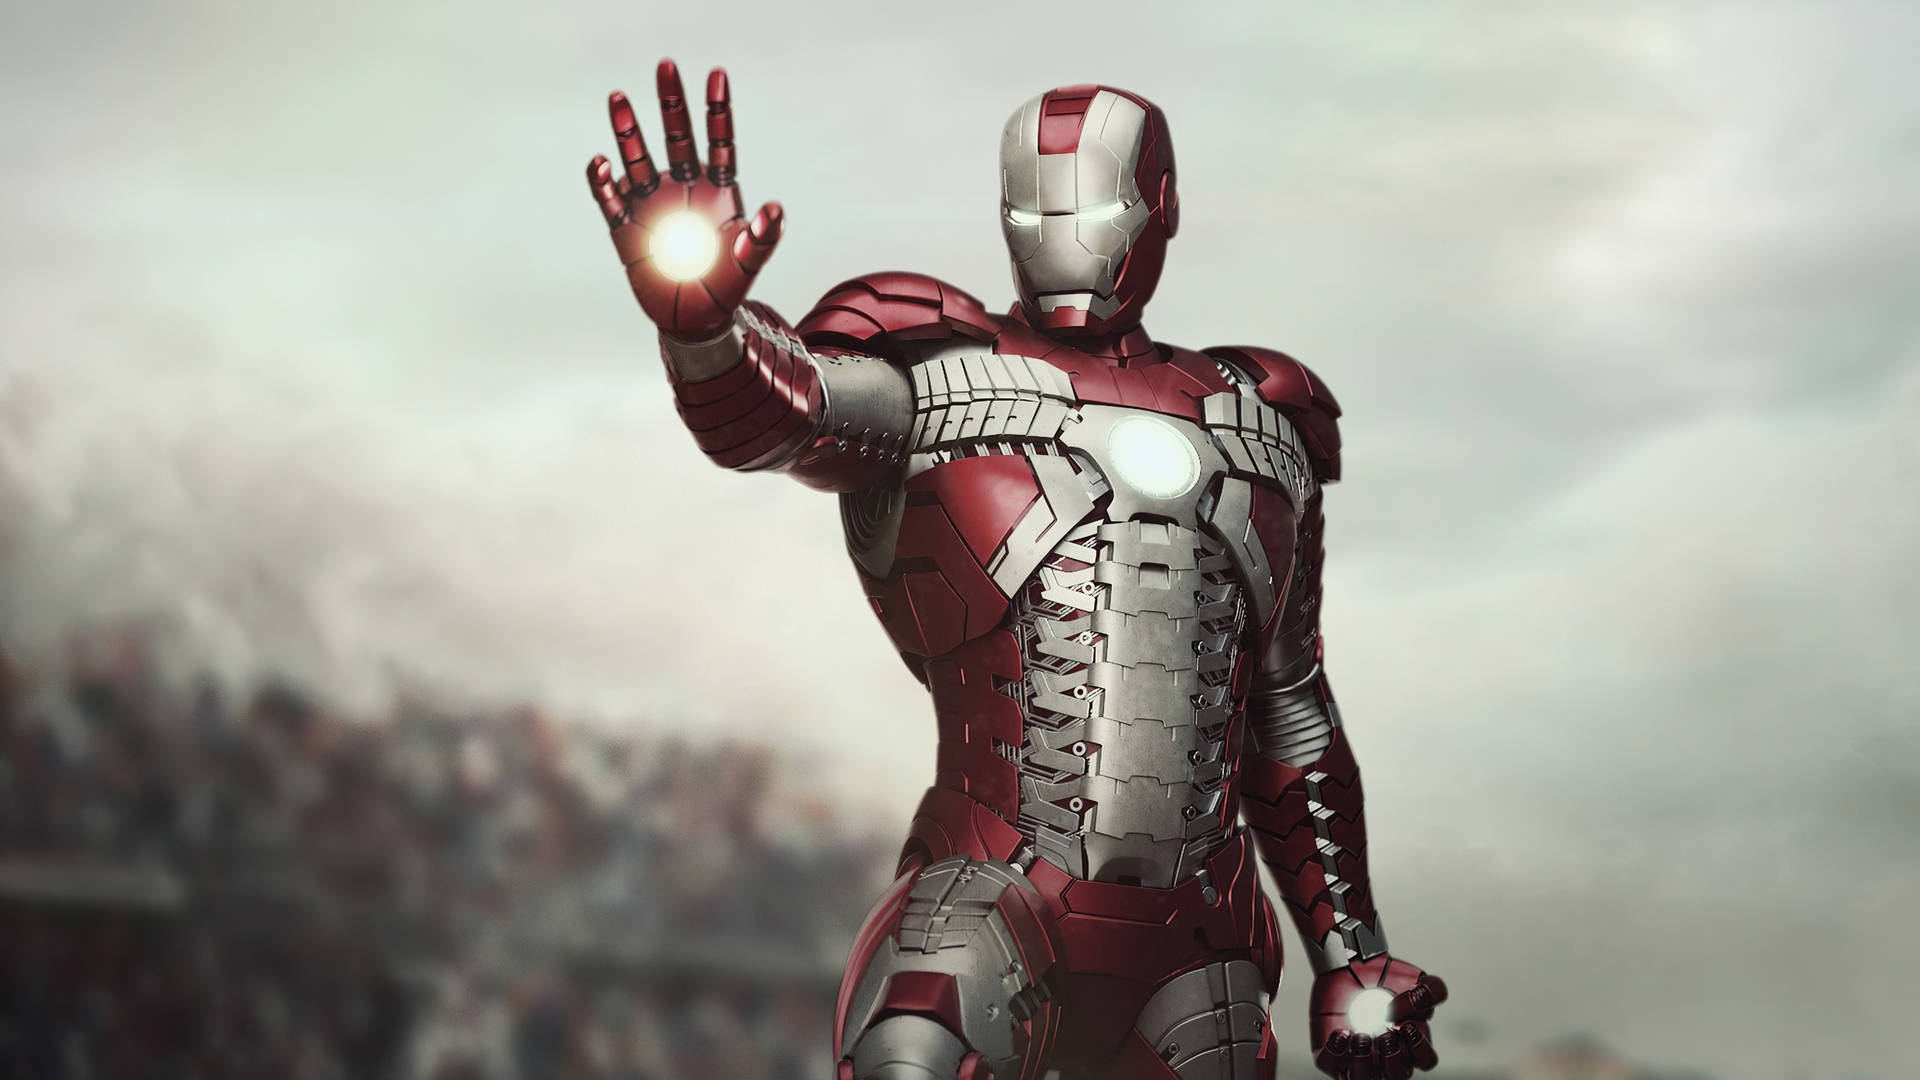 Cool Iron Man Red Silver Suit Wallpaper